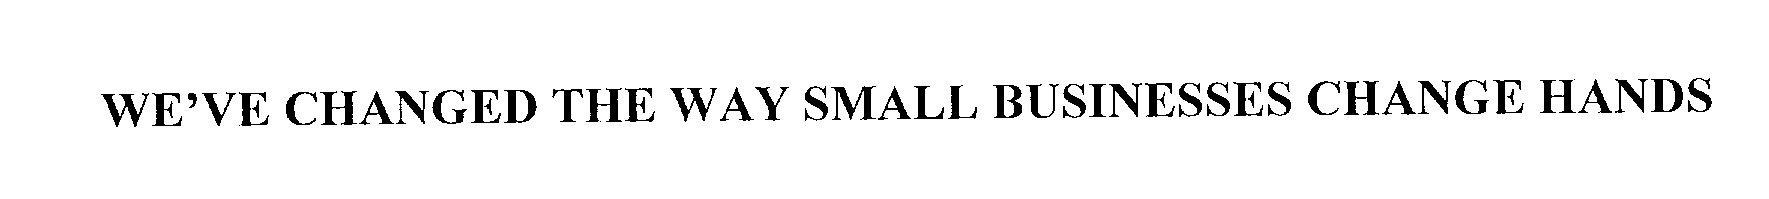 Trademark Logo WE'VE CHANGED THE WAY SMALL BUSINESSES CHANGE HANDS